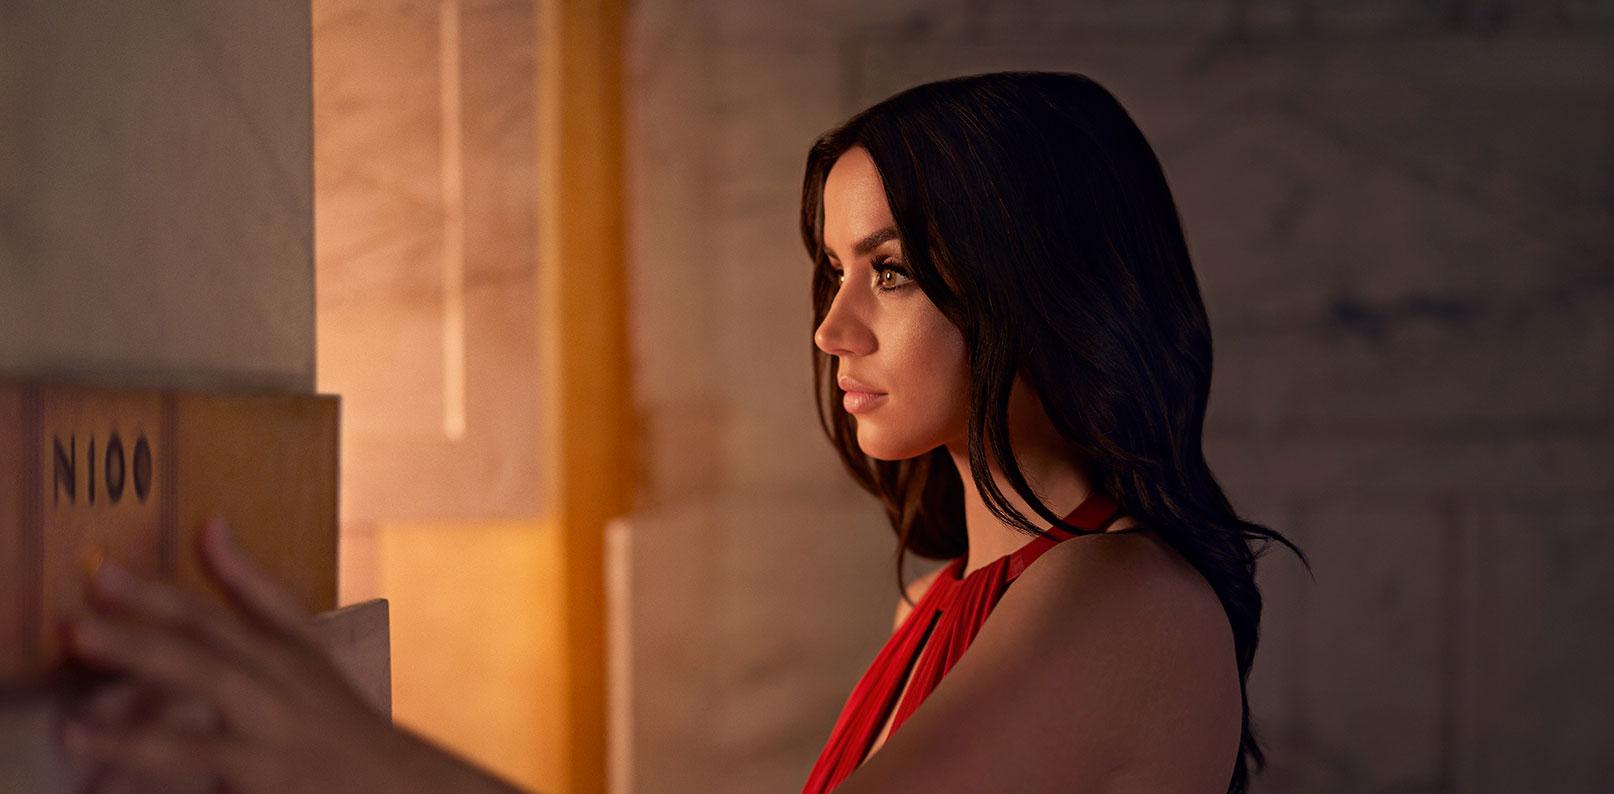 Campari's Latest Film Stars Ana de Armas and a Glowing Red Milan